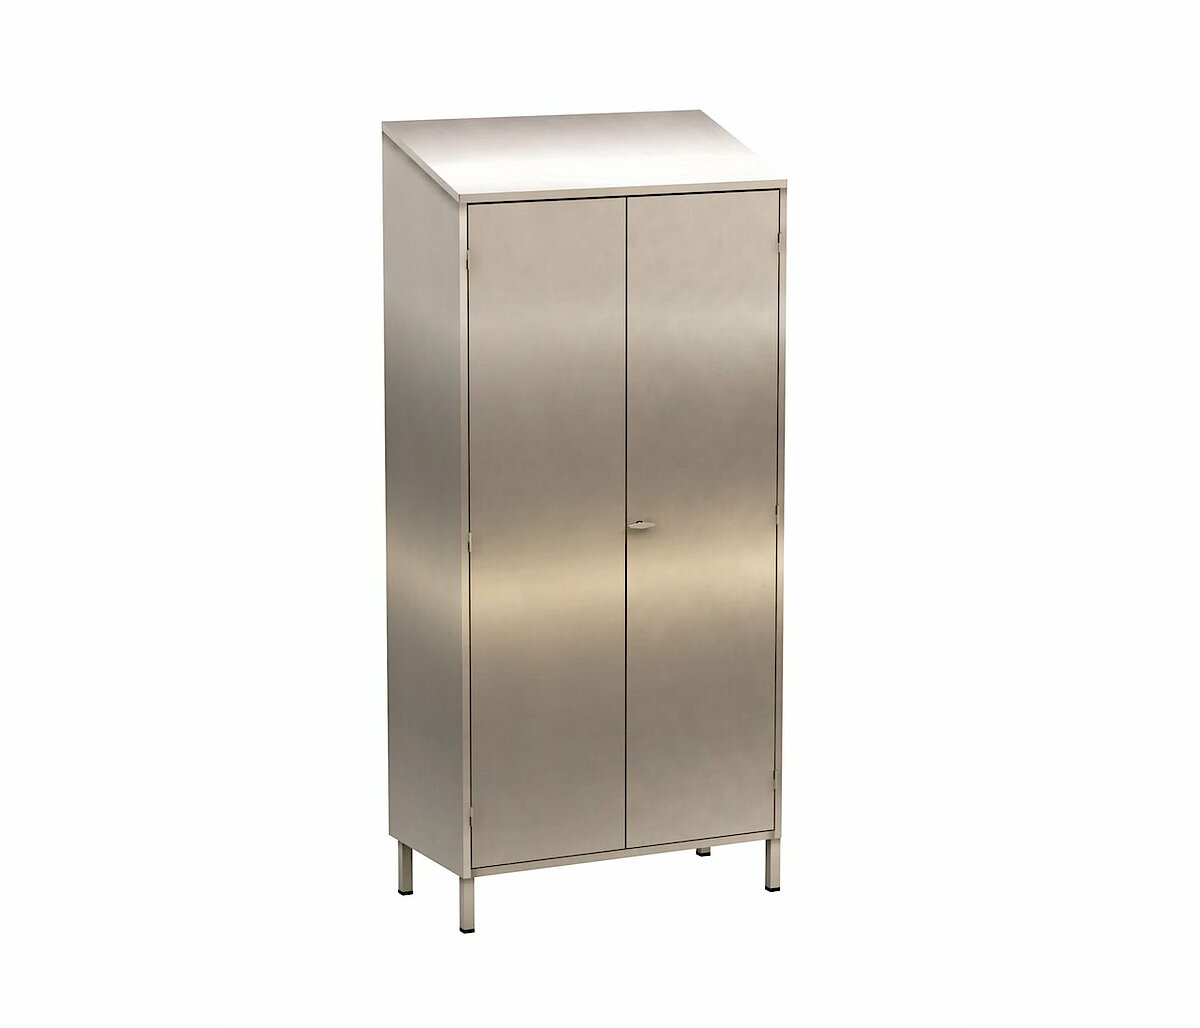 Stainless steel cleanroom cabinet